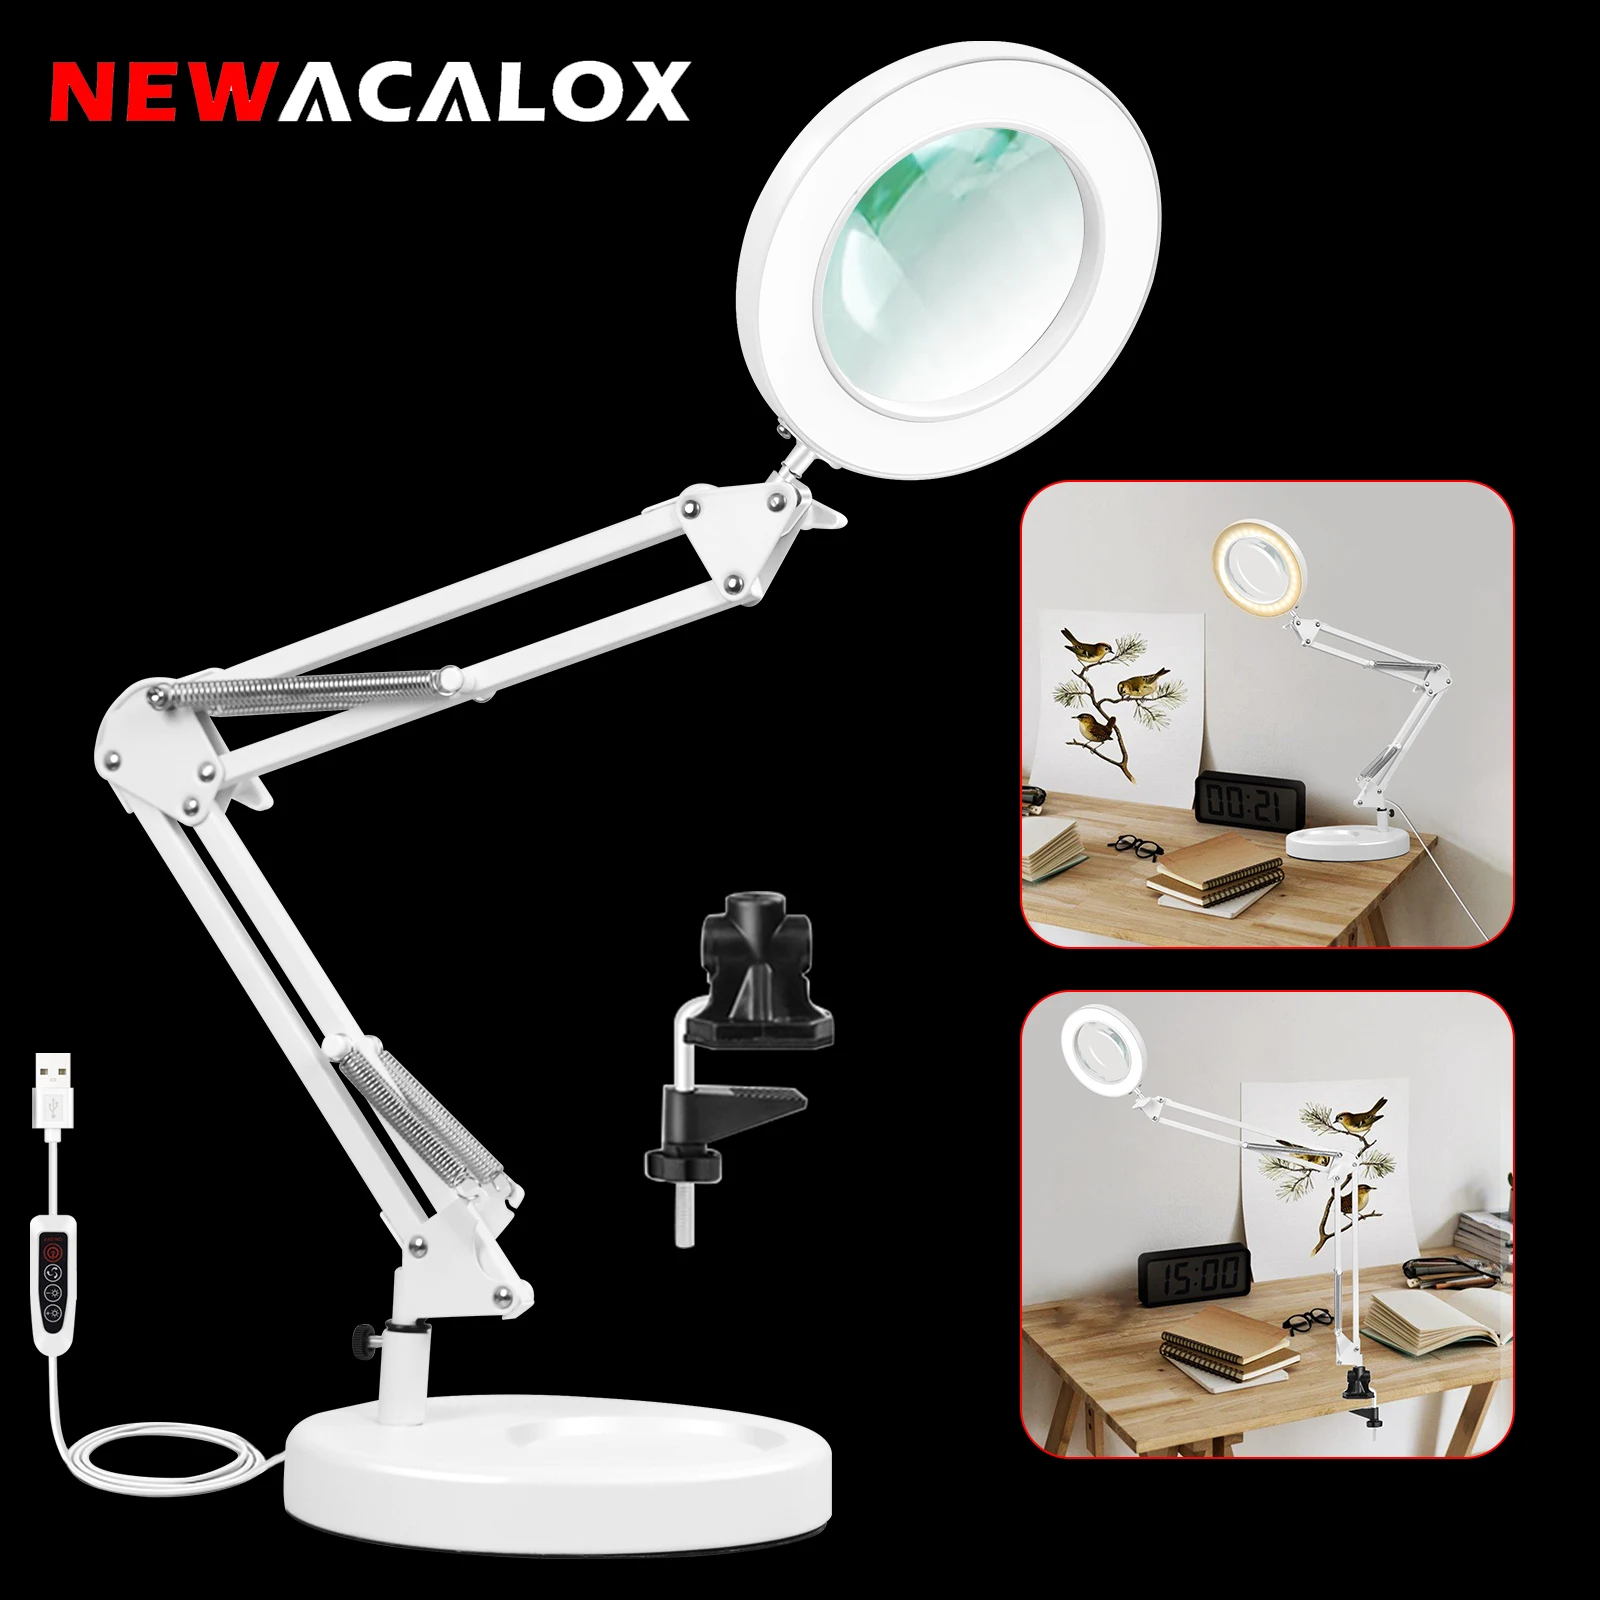 

NEWACALOX 5X Illuminated Magnifier USB 3 Colors LED Magnifying Glass for Soldering Iron Repair/Table Lamp/Skincare Beauty Tool